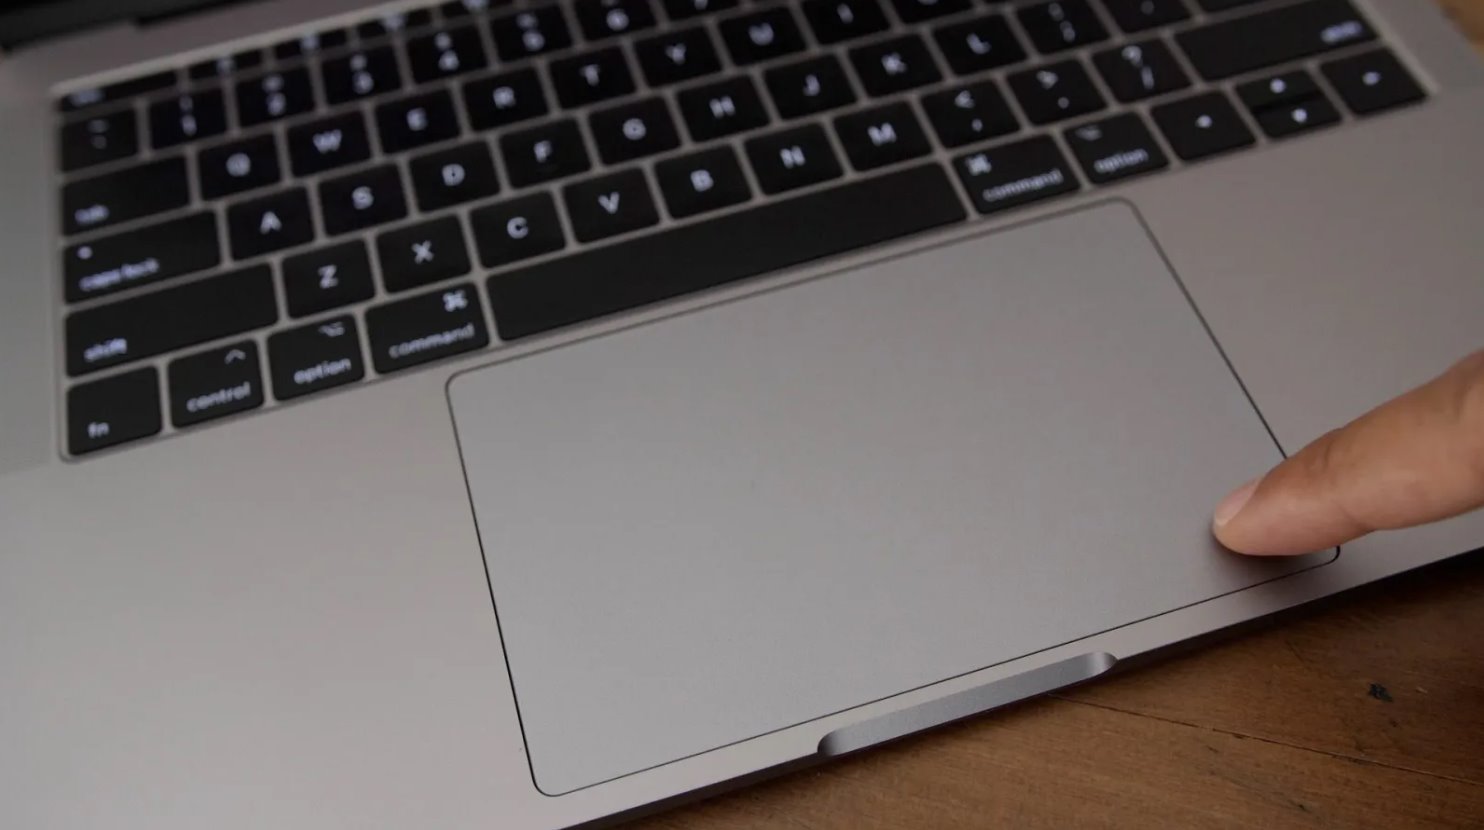 How To Enable Trackpad On Macbook Pro